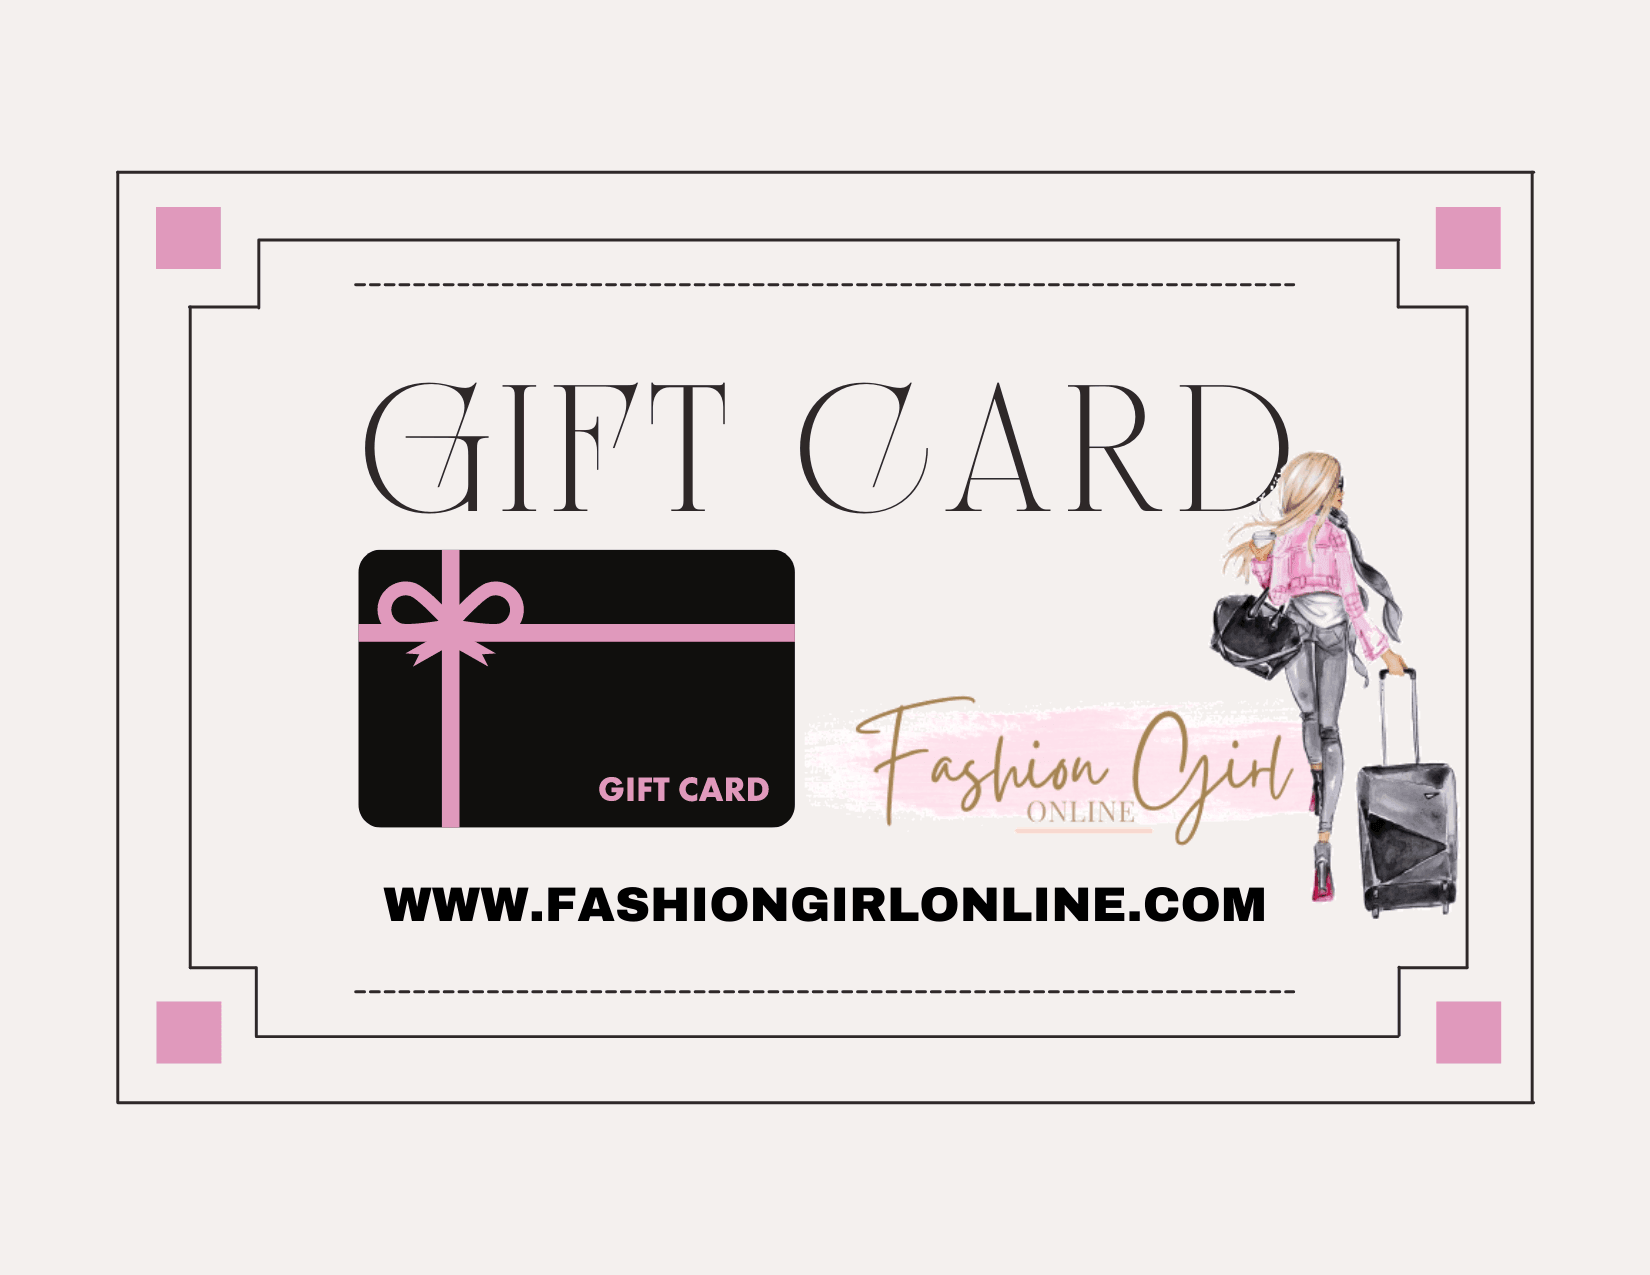 GIFT CARDS - Fashion Girl Online Store